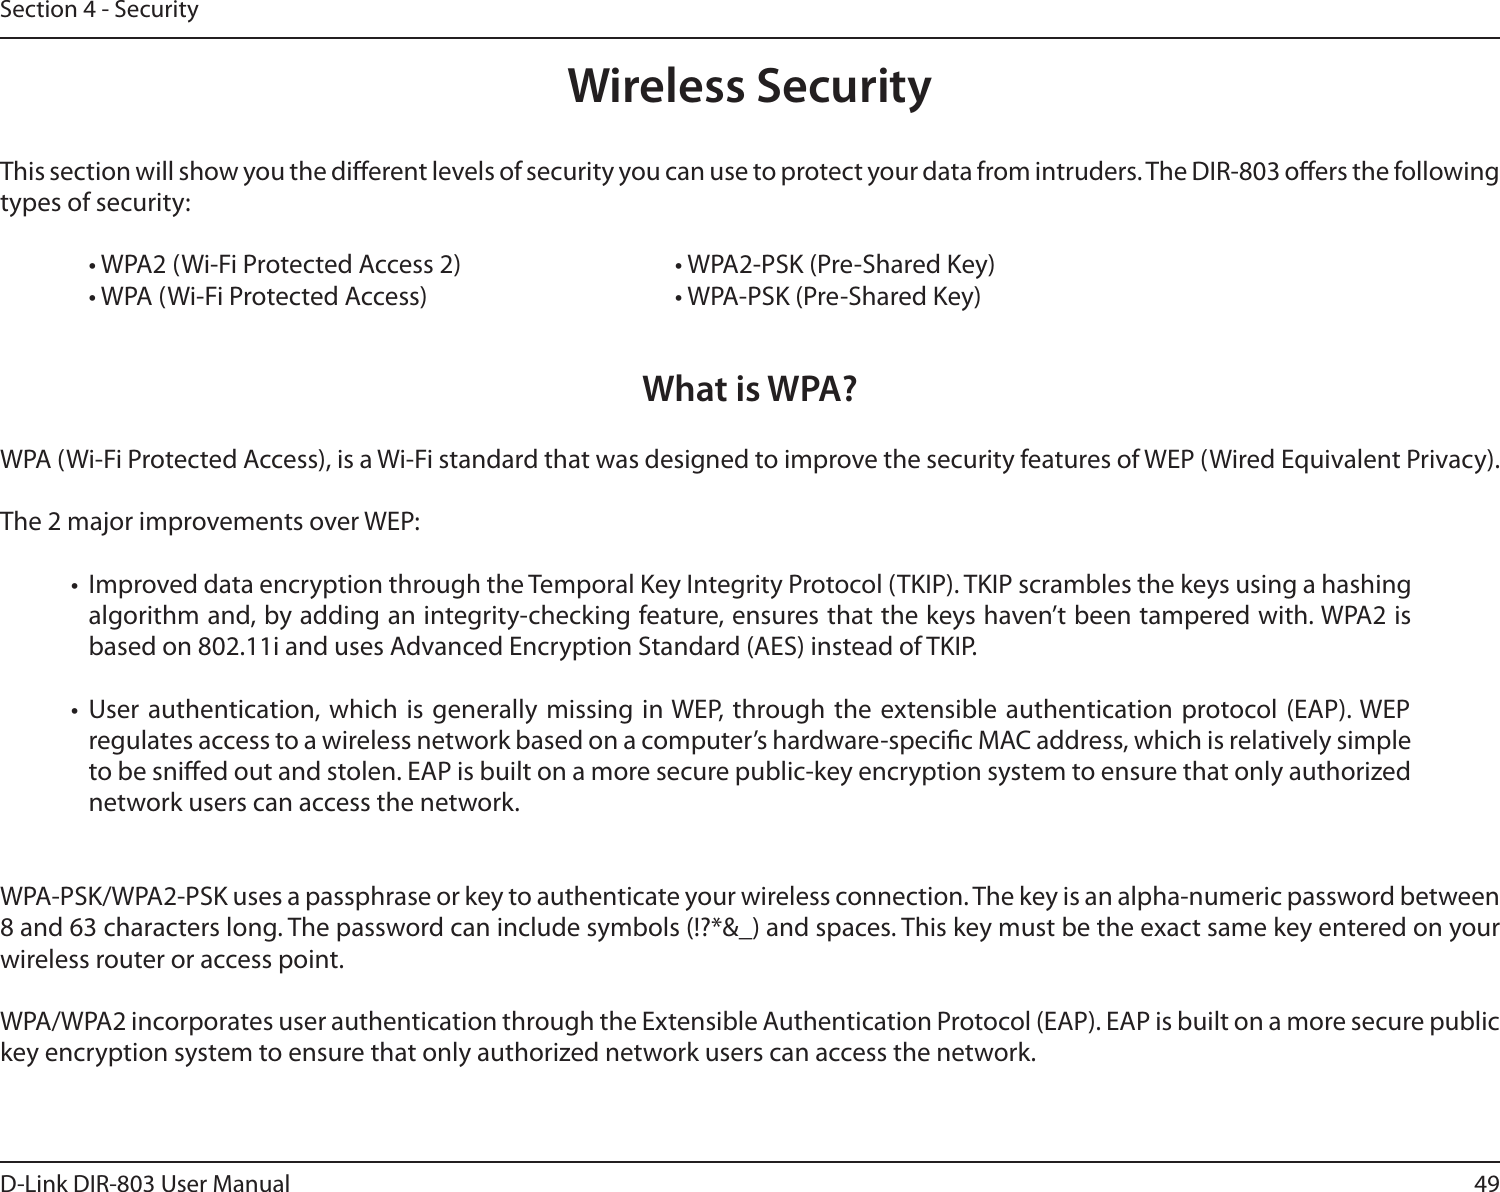 49D-Link DIR-803 User ManualSection 4 - SecurityWireless SecurityThis section will show you the dierent levels of security you can use to protect your data from intruders. The DIR-803 oers the following types of security:  • WPA2 (Wi-Fi Protected Access 2)       • WPA2-PSK (Pre-Shared Key)  • WPA (Wi-Fi Protected Access)        • WPA-PSK (Pre-Shared Key)What is WPA?WPA (Wi-Fi Protected Access), is a Wi-Fi standard that was designed to improve the security features of WEP (Wired Equivalent Privacy).  The 2 major improvements over WEP: •  Improved data encryption through the Temporal Key Integrity Protocol (TKIP). TKIP scrambles the keys using a hashing algorithm and, by adding an integrity-checking feature, ensures that the keys haven’t been tampered with. WPA2 is based on 802.11i and uses Advanced Encryption Standard (AES) instead of TKIP.• User authentication, which is generally missing in WEP, through the extensible authentication protocol (EAP). WEP regulates access to a wireless network based on a computer’s hardware-specic MAC address, which is relatively simple to be snied out and stolen. EAP is built on a more secure public-key encryption system to ensure that only authorized network users can access the network.WPA-PSK/WPA2-PSK uses a passphrase or key to authenticate your wireless connection. The key is an alpha-numeric password between 8 and 63 characters long. The password can include symbols (!?*&amp;_) and spaces. This key must be the exact same key entered on your wireless router or access point.WPA/WPA2 incorporates user authentication through the Extensible Authentication Protocol (EAP). EAP is built on a more secure public key encryption system to ensure that only authorized network users can access the network.